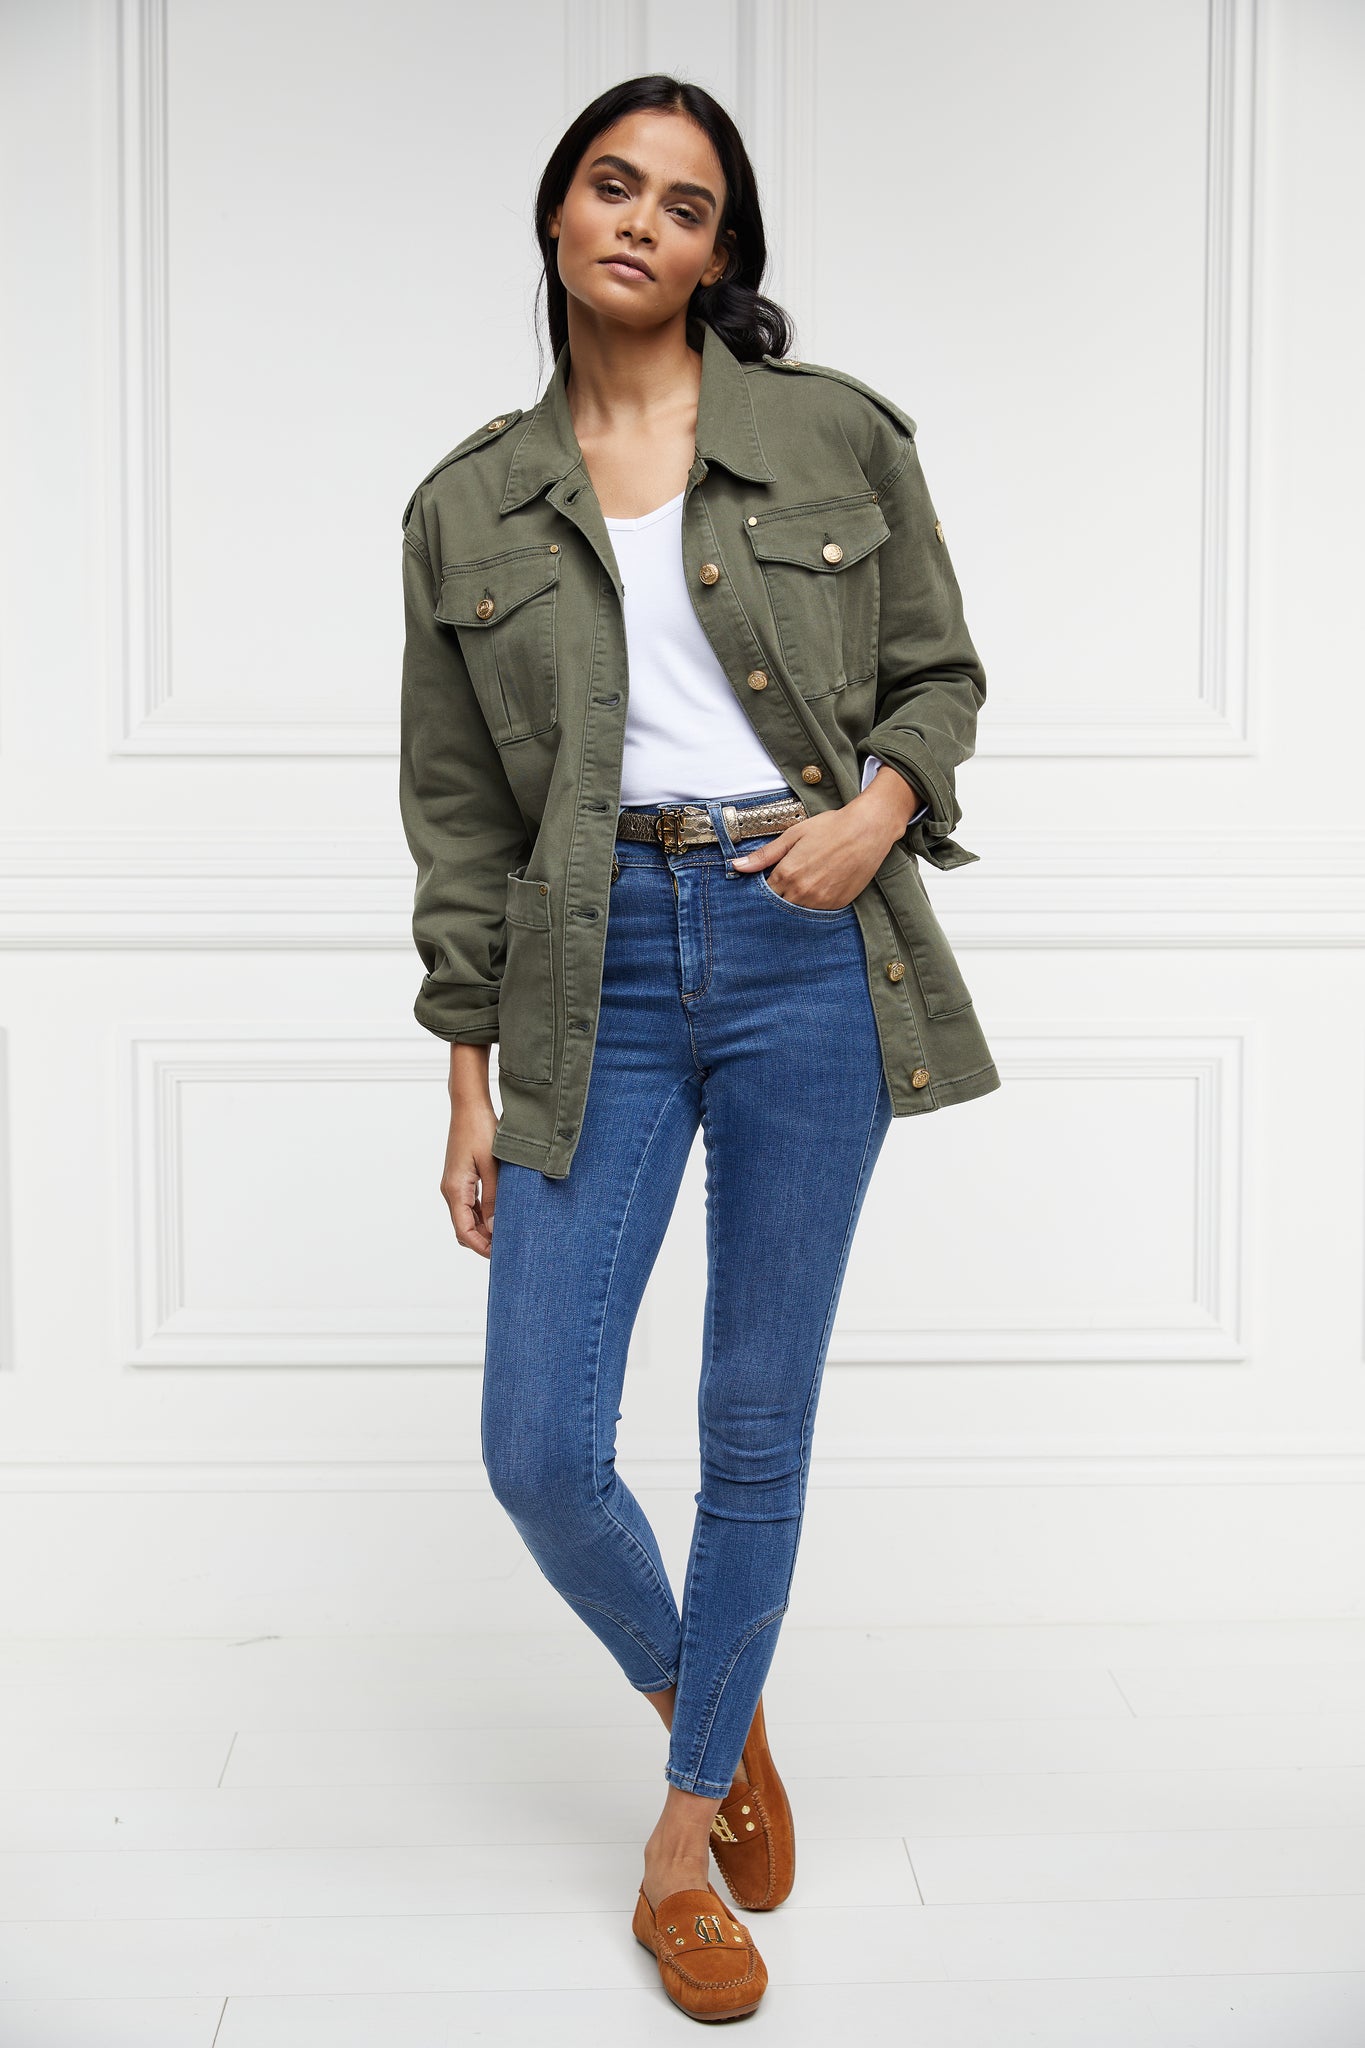 Relaxed fit collared artillery style jacket in khaki with four pockets two chest ones being box pleated  and two hip being patch pockets with gold jean button fastenings adjustable long sleeves and epaulette shoulder detail worn with white tee classic indigo denim jeans and tan suede loafers